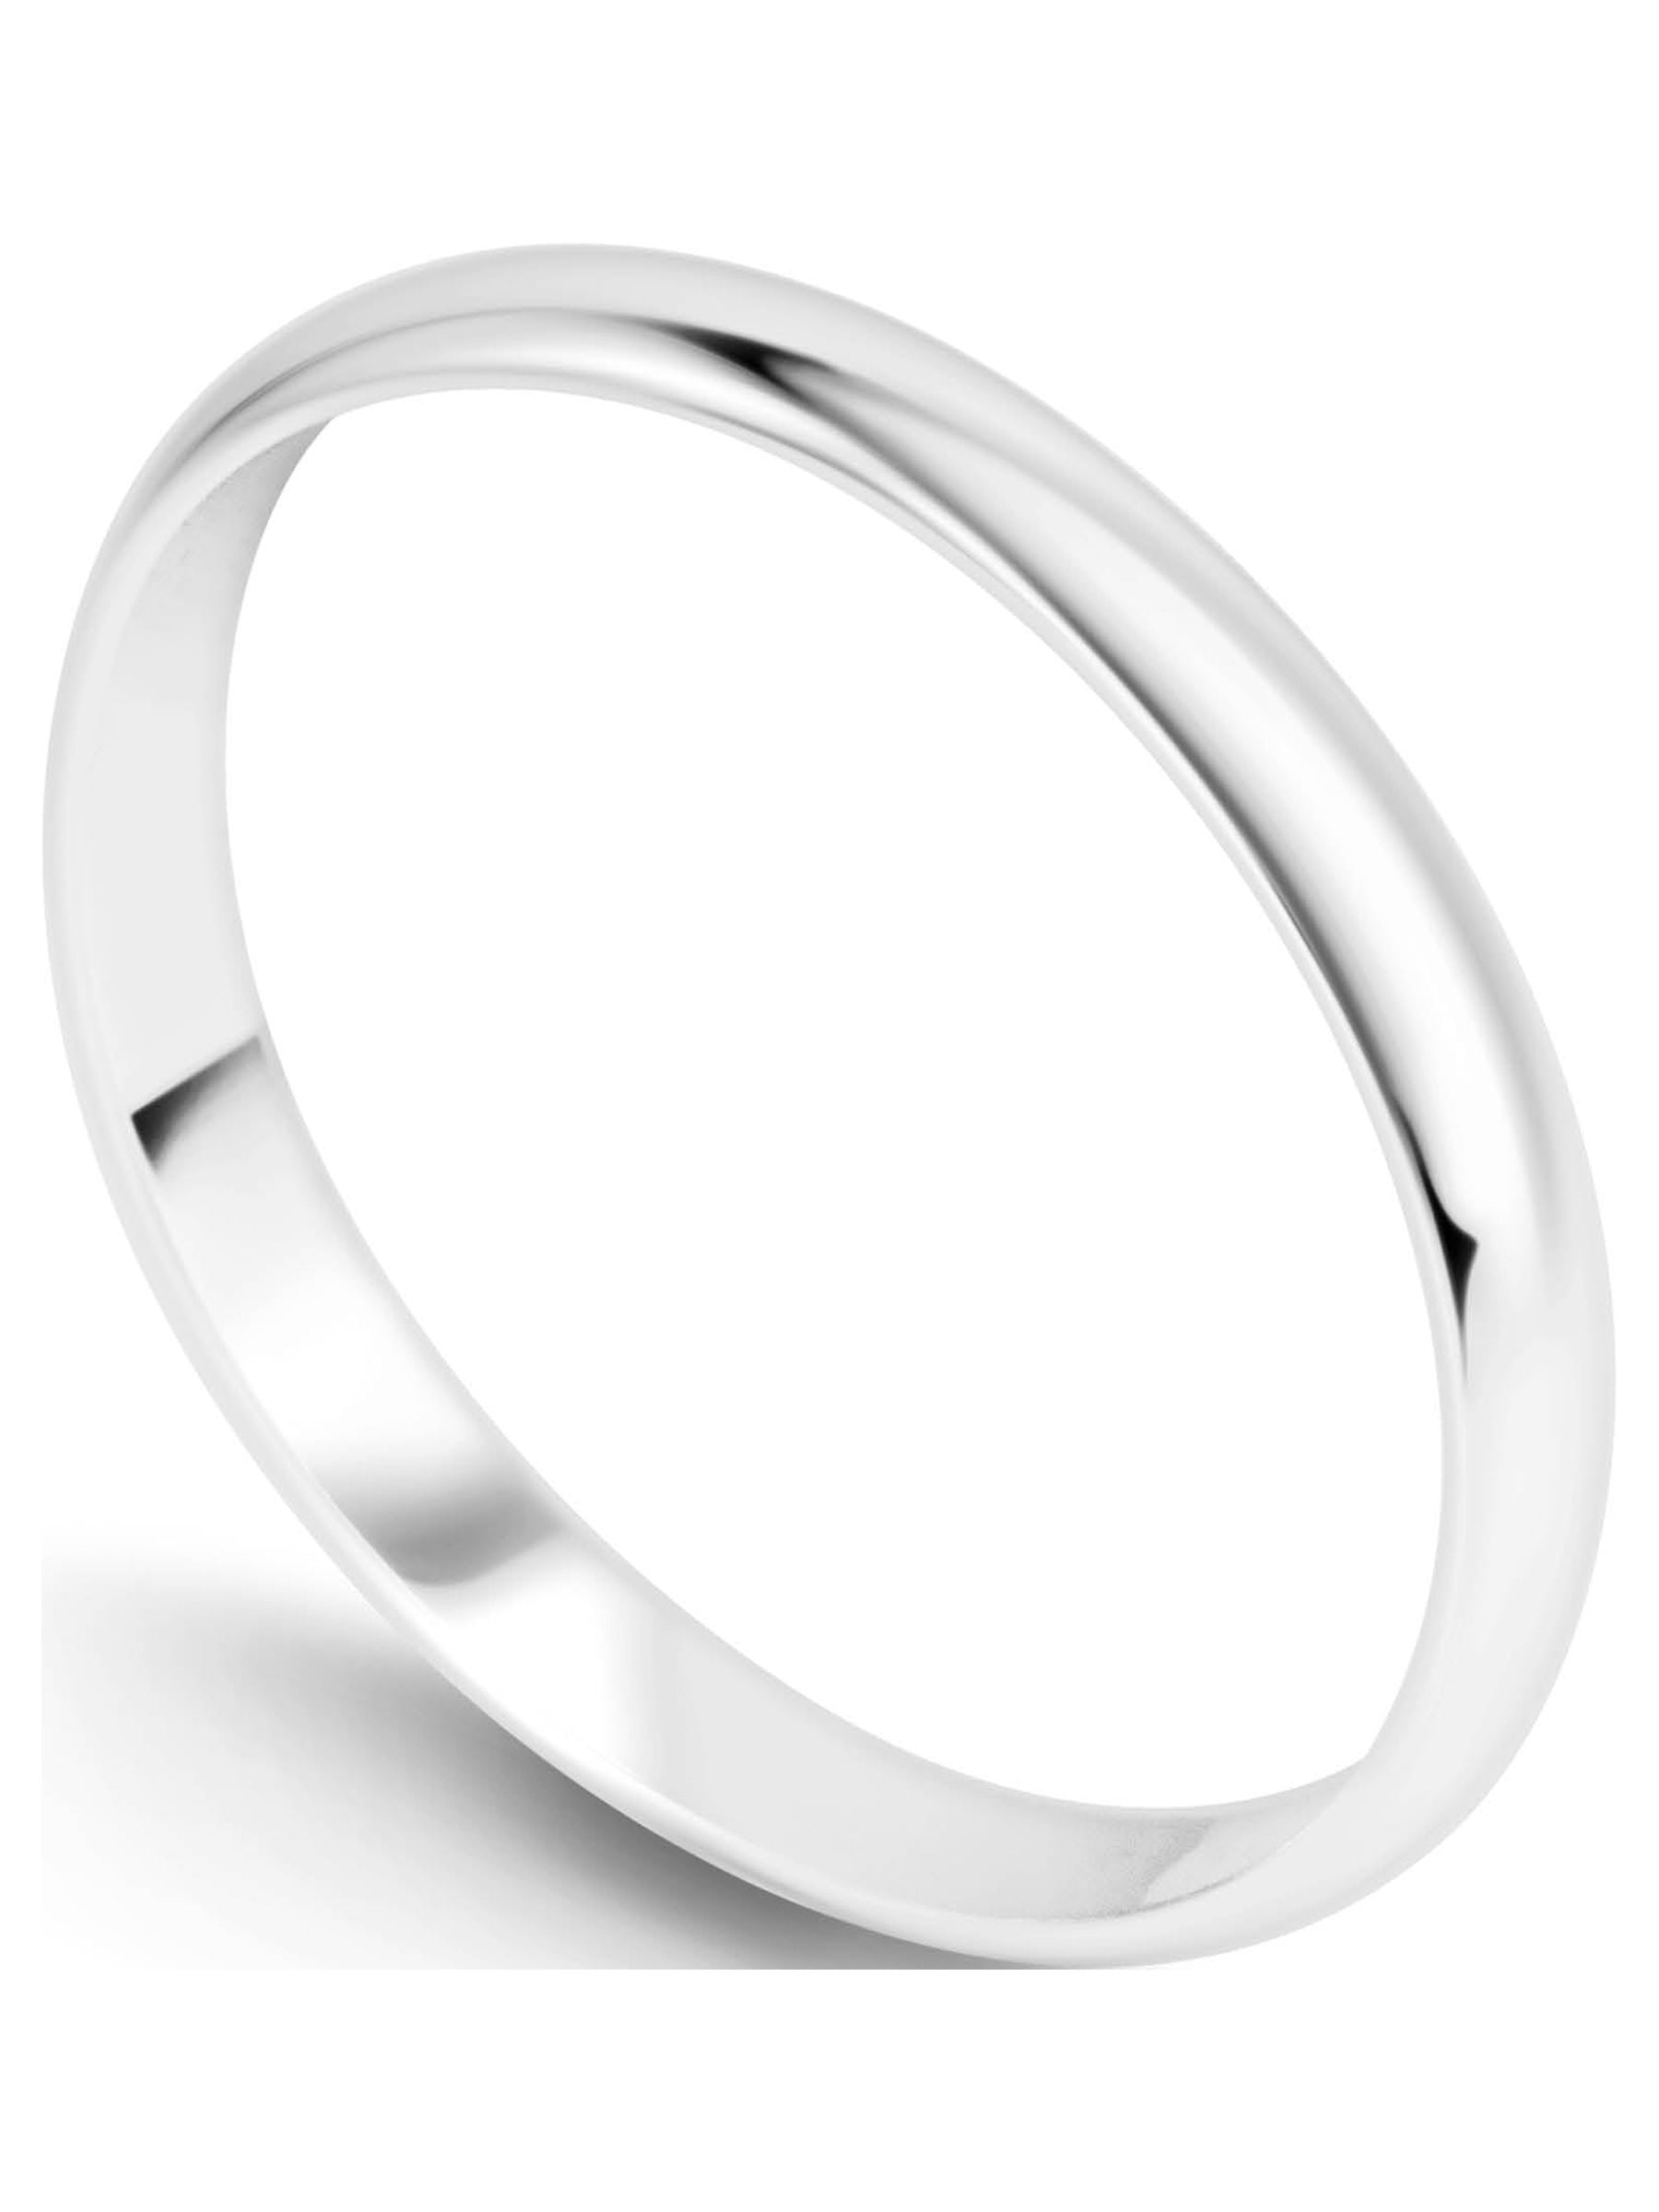 Sterling Silver Wedding Band 2mm Men or Women Bridal Ring Size